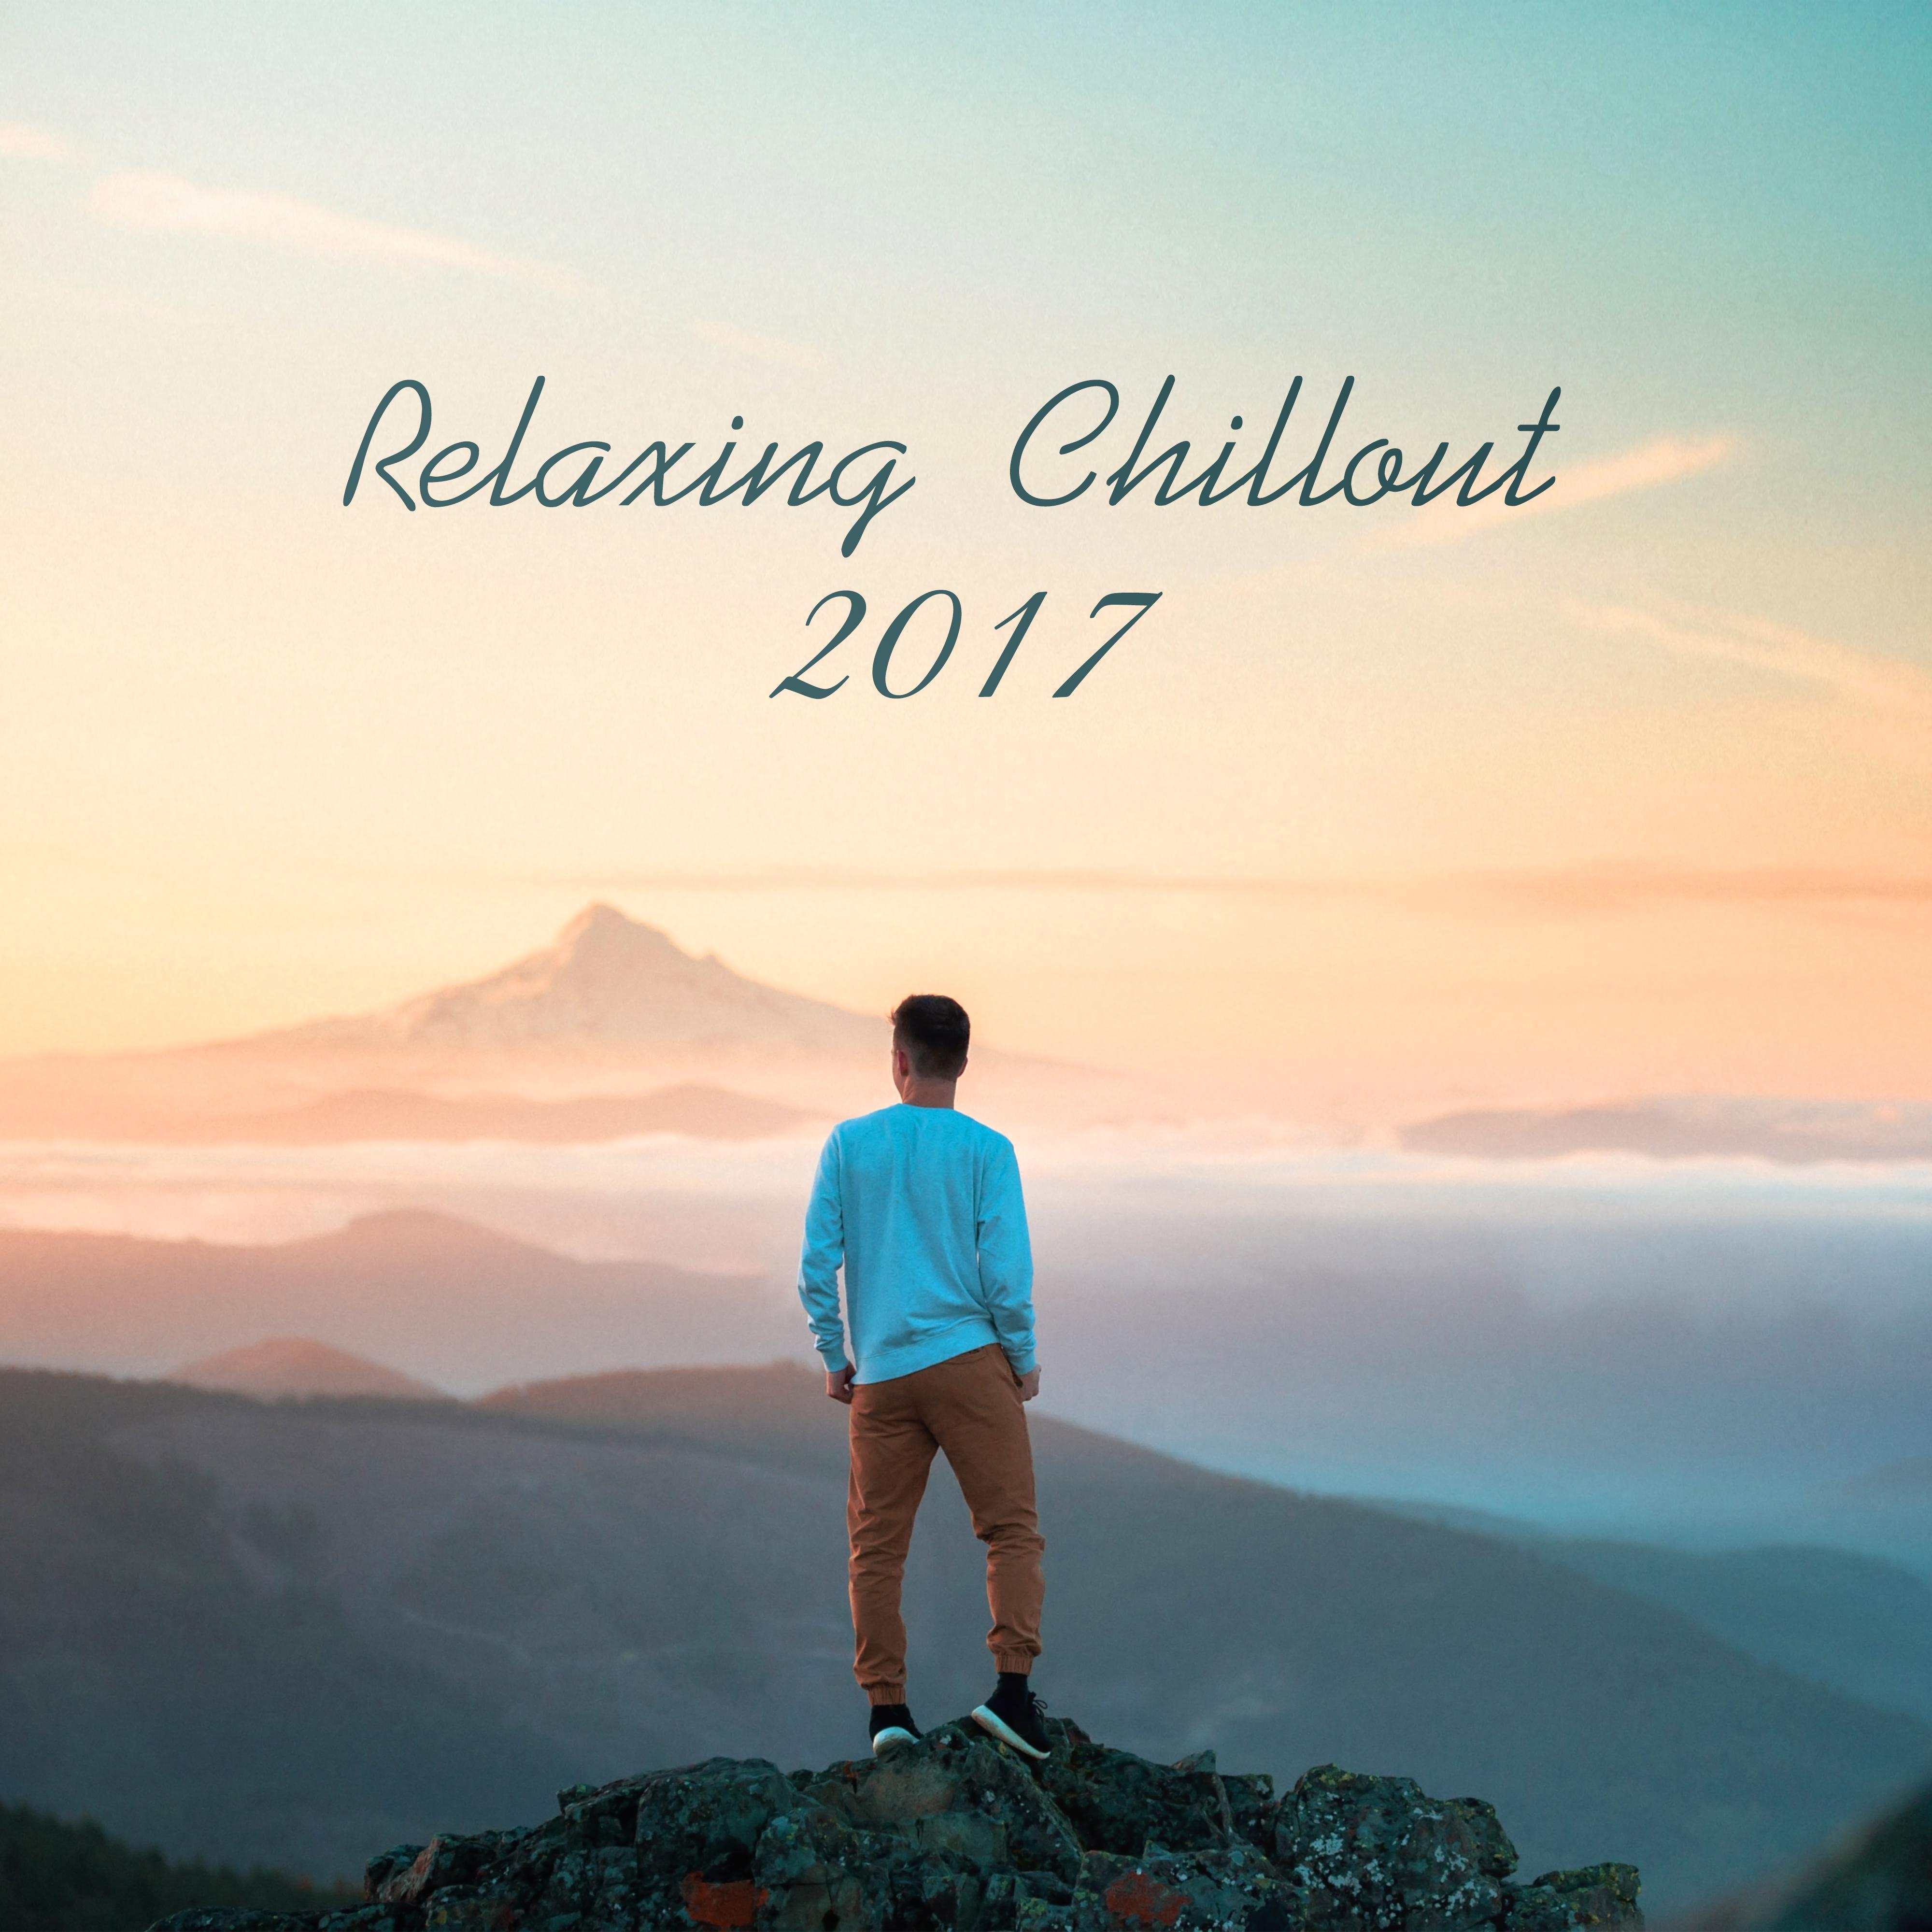 Relaxing Chillout 2017 – Smooth Chill Out Vibes, Relax, Chill Out Music for Rest